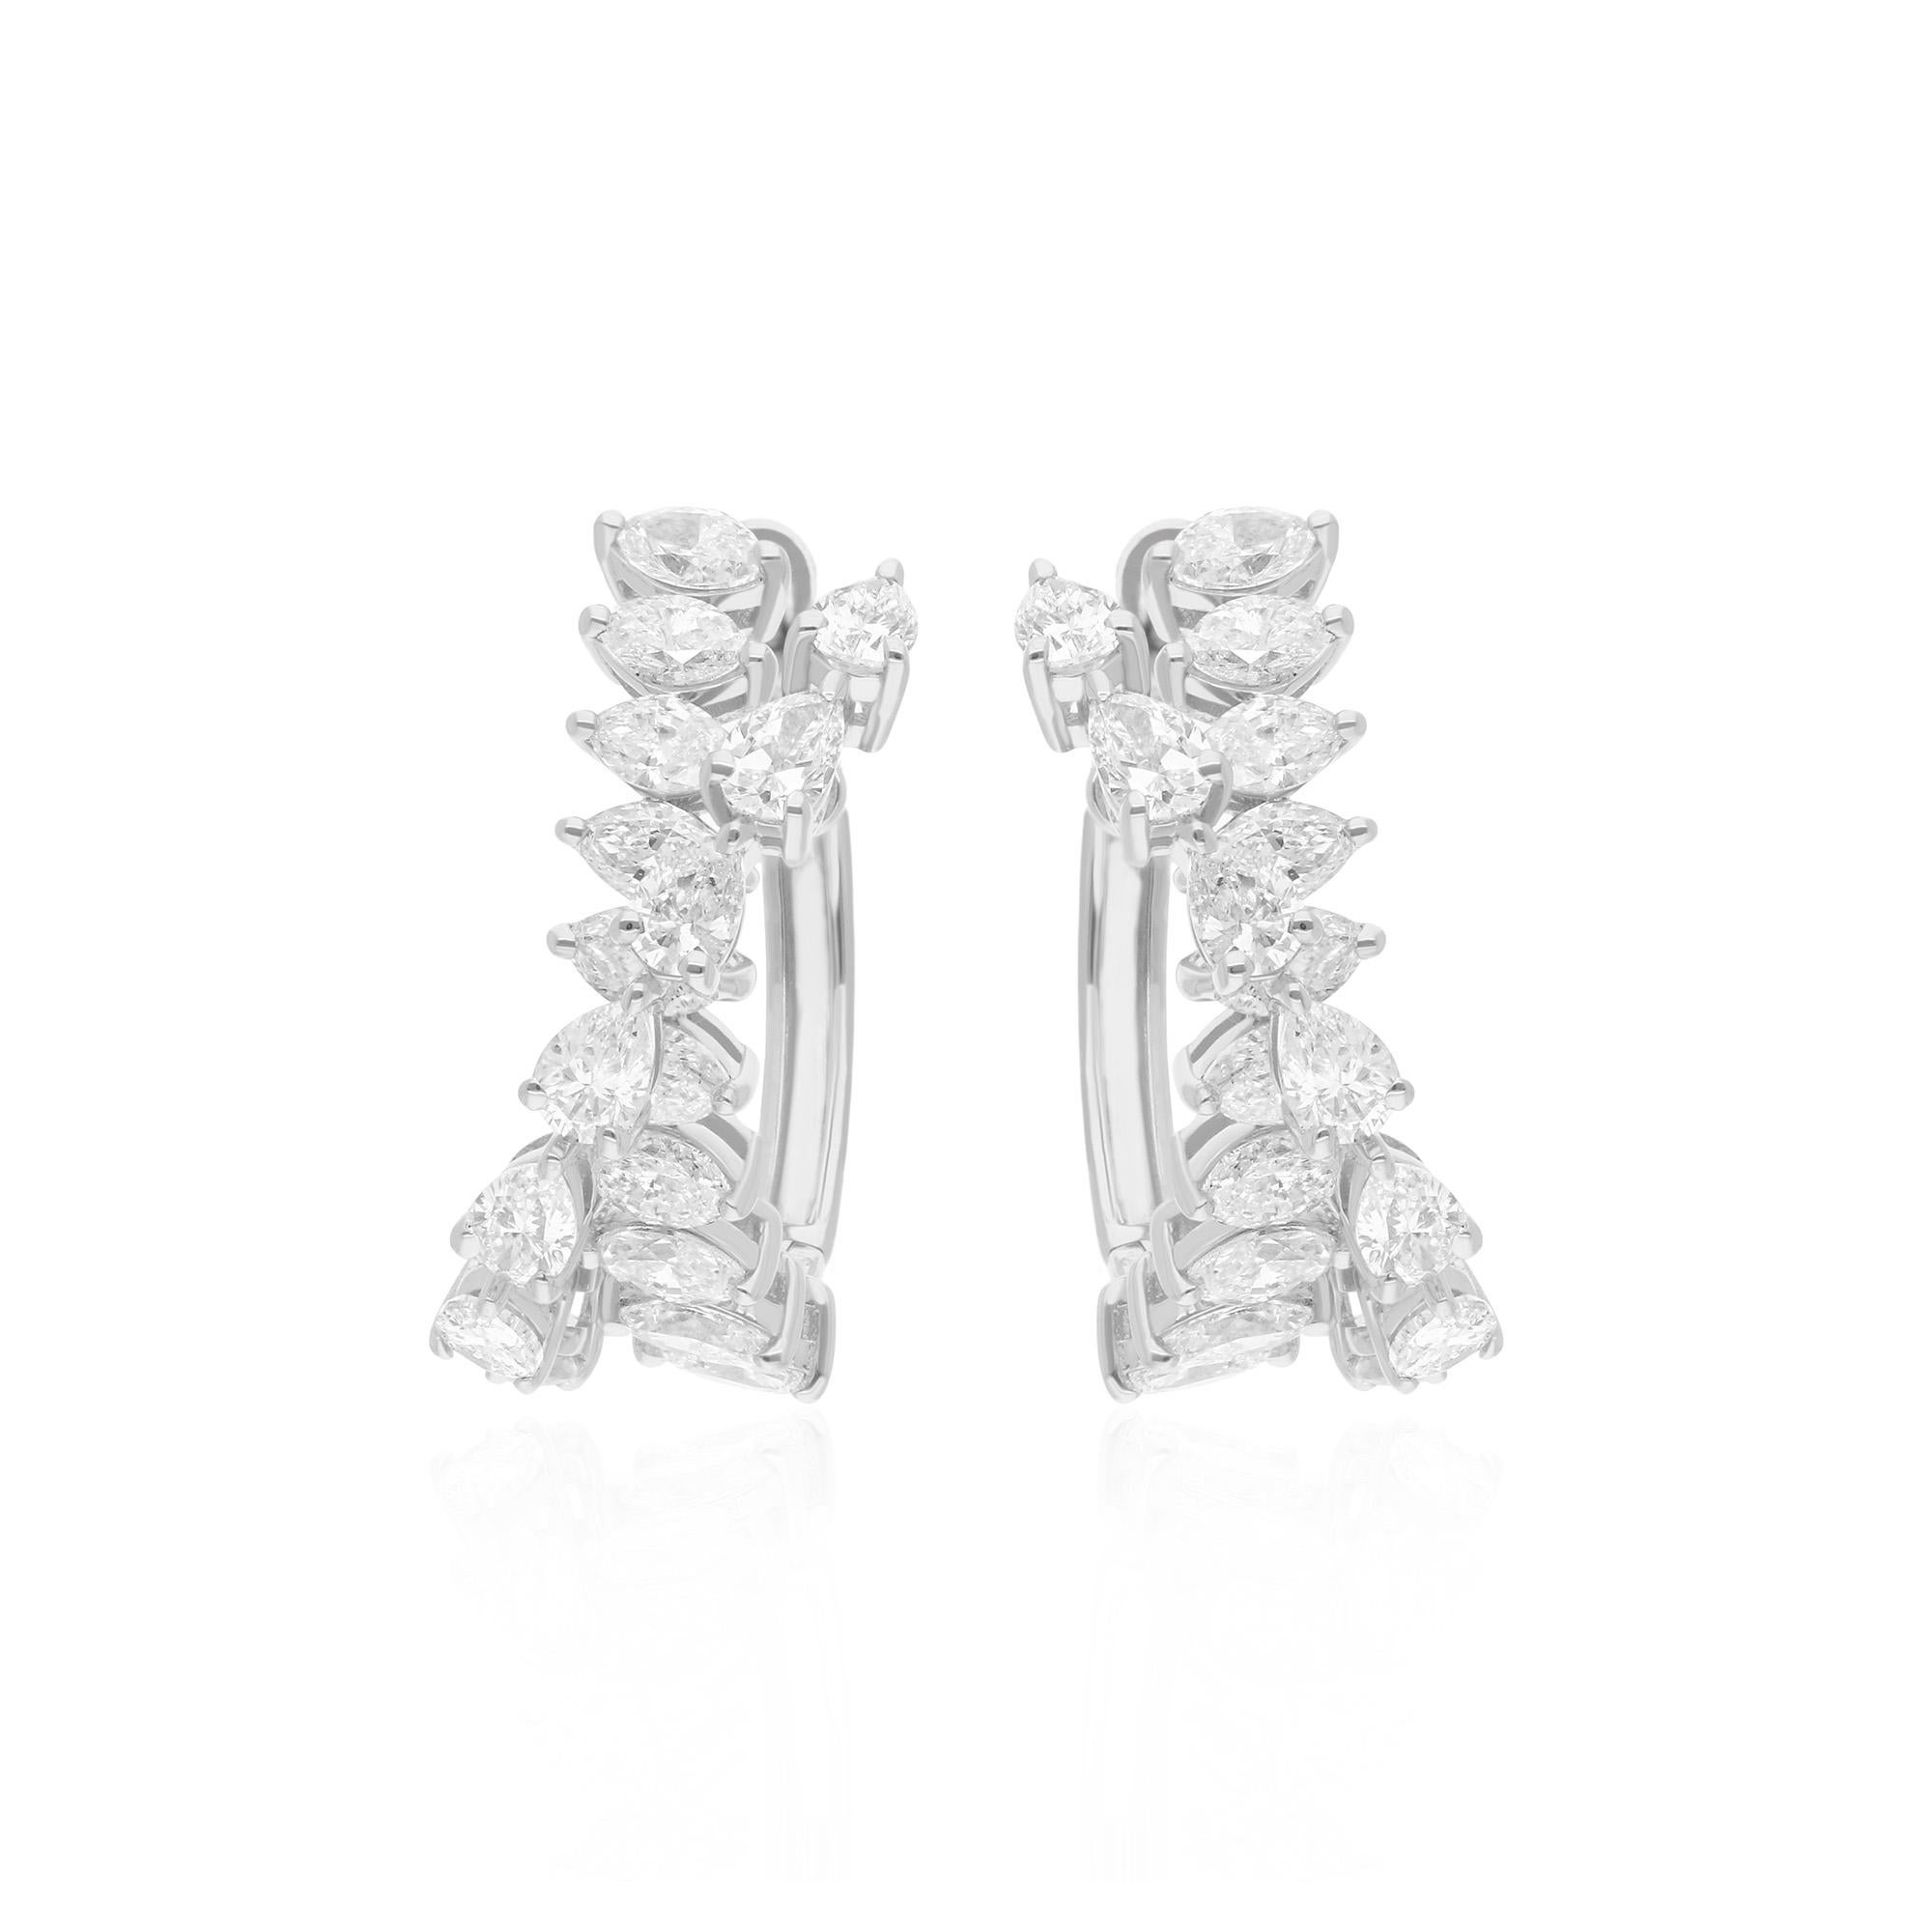 Crafted in lustrous 14 karat white gold, the metal serves as a perfect backdrop to the sparkling diamonds, creating a harmonious blend of precious materials. The smooth, polished finish of the white gold adds a touch of refinement to the earrings,